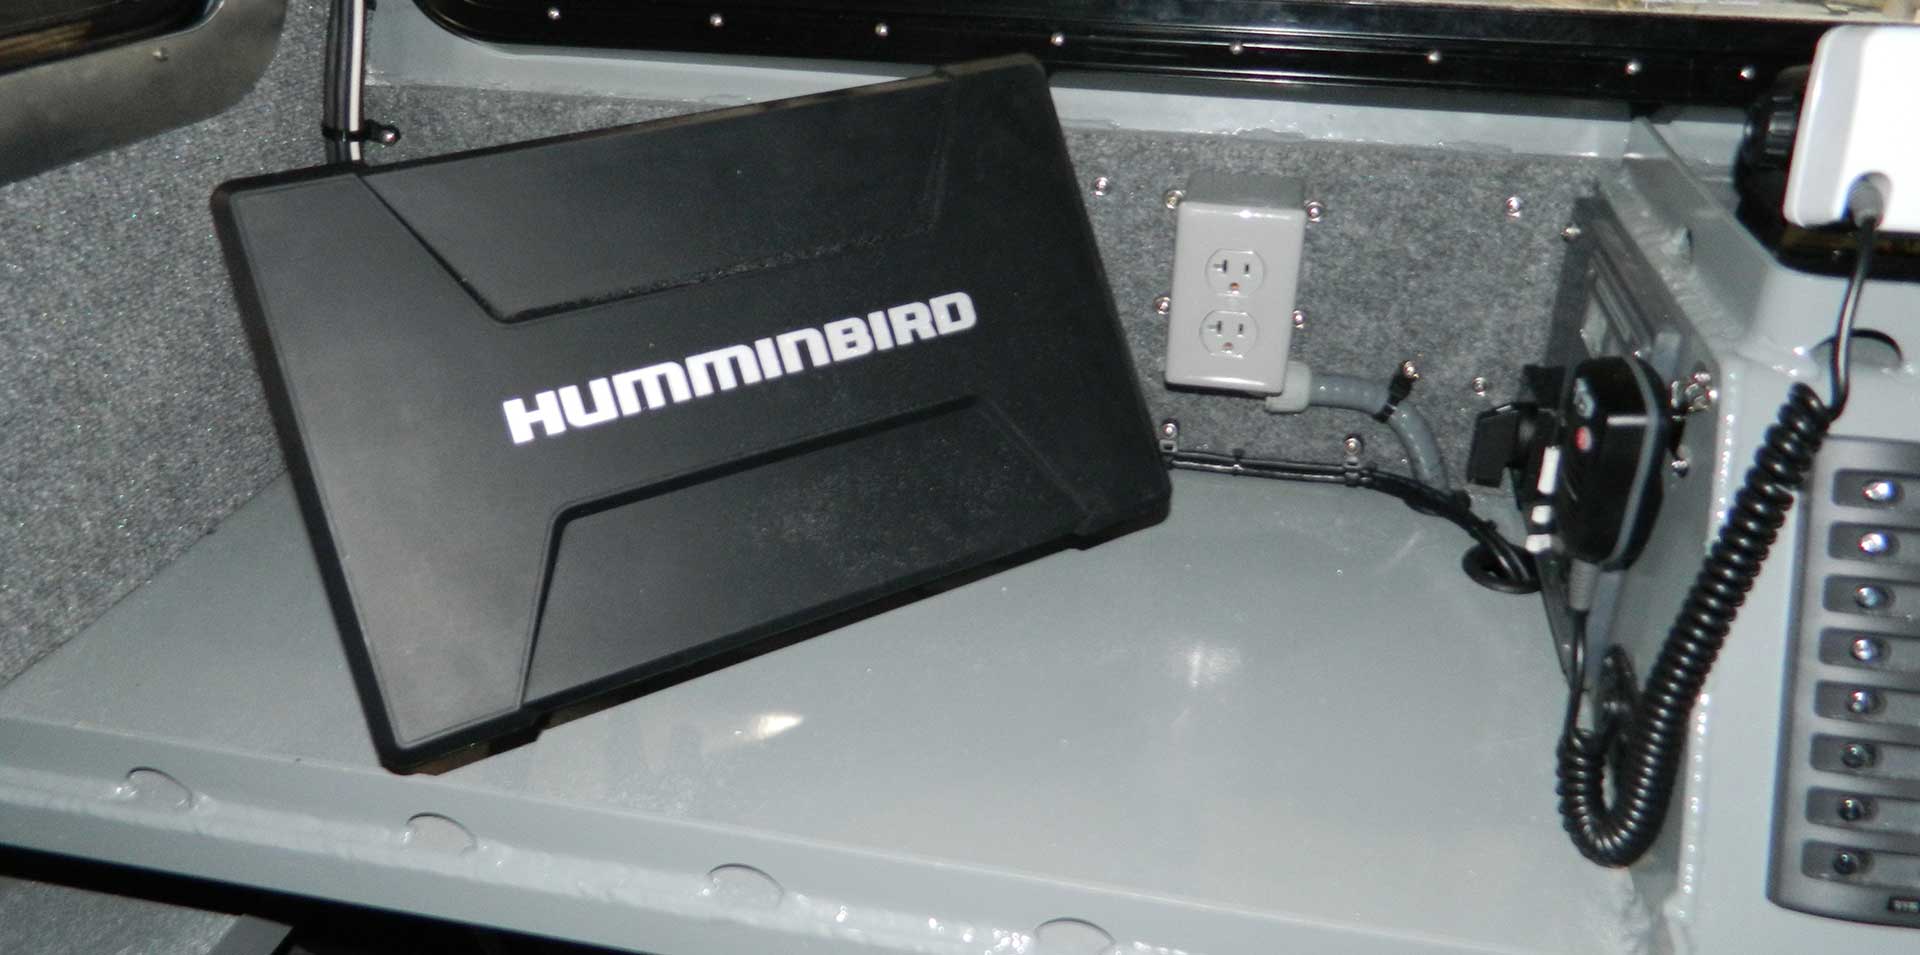 Silver Ships includes Humminbird electronics in some boats